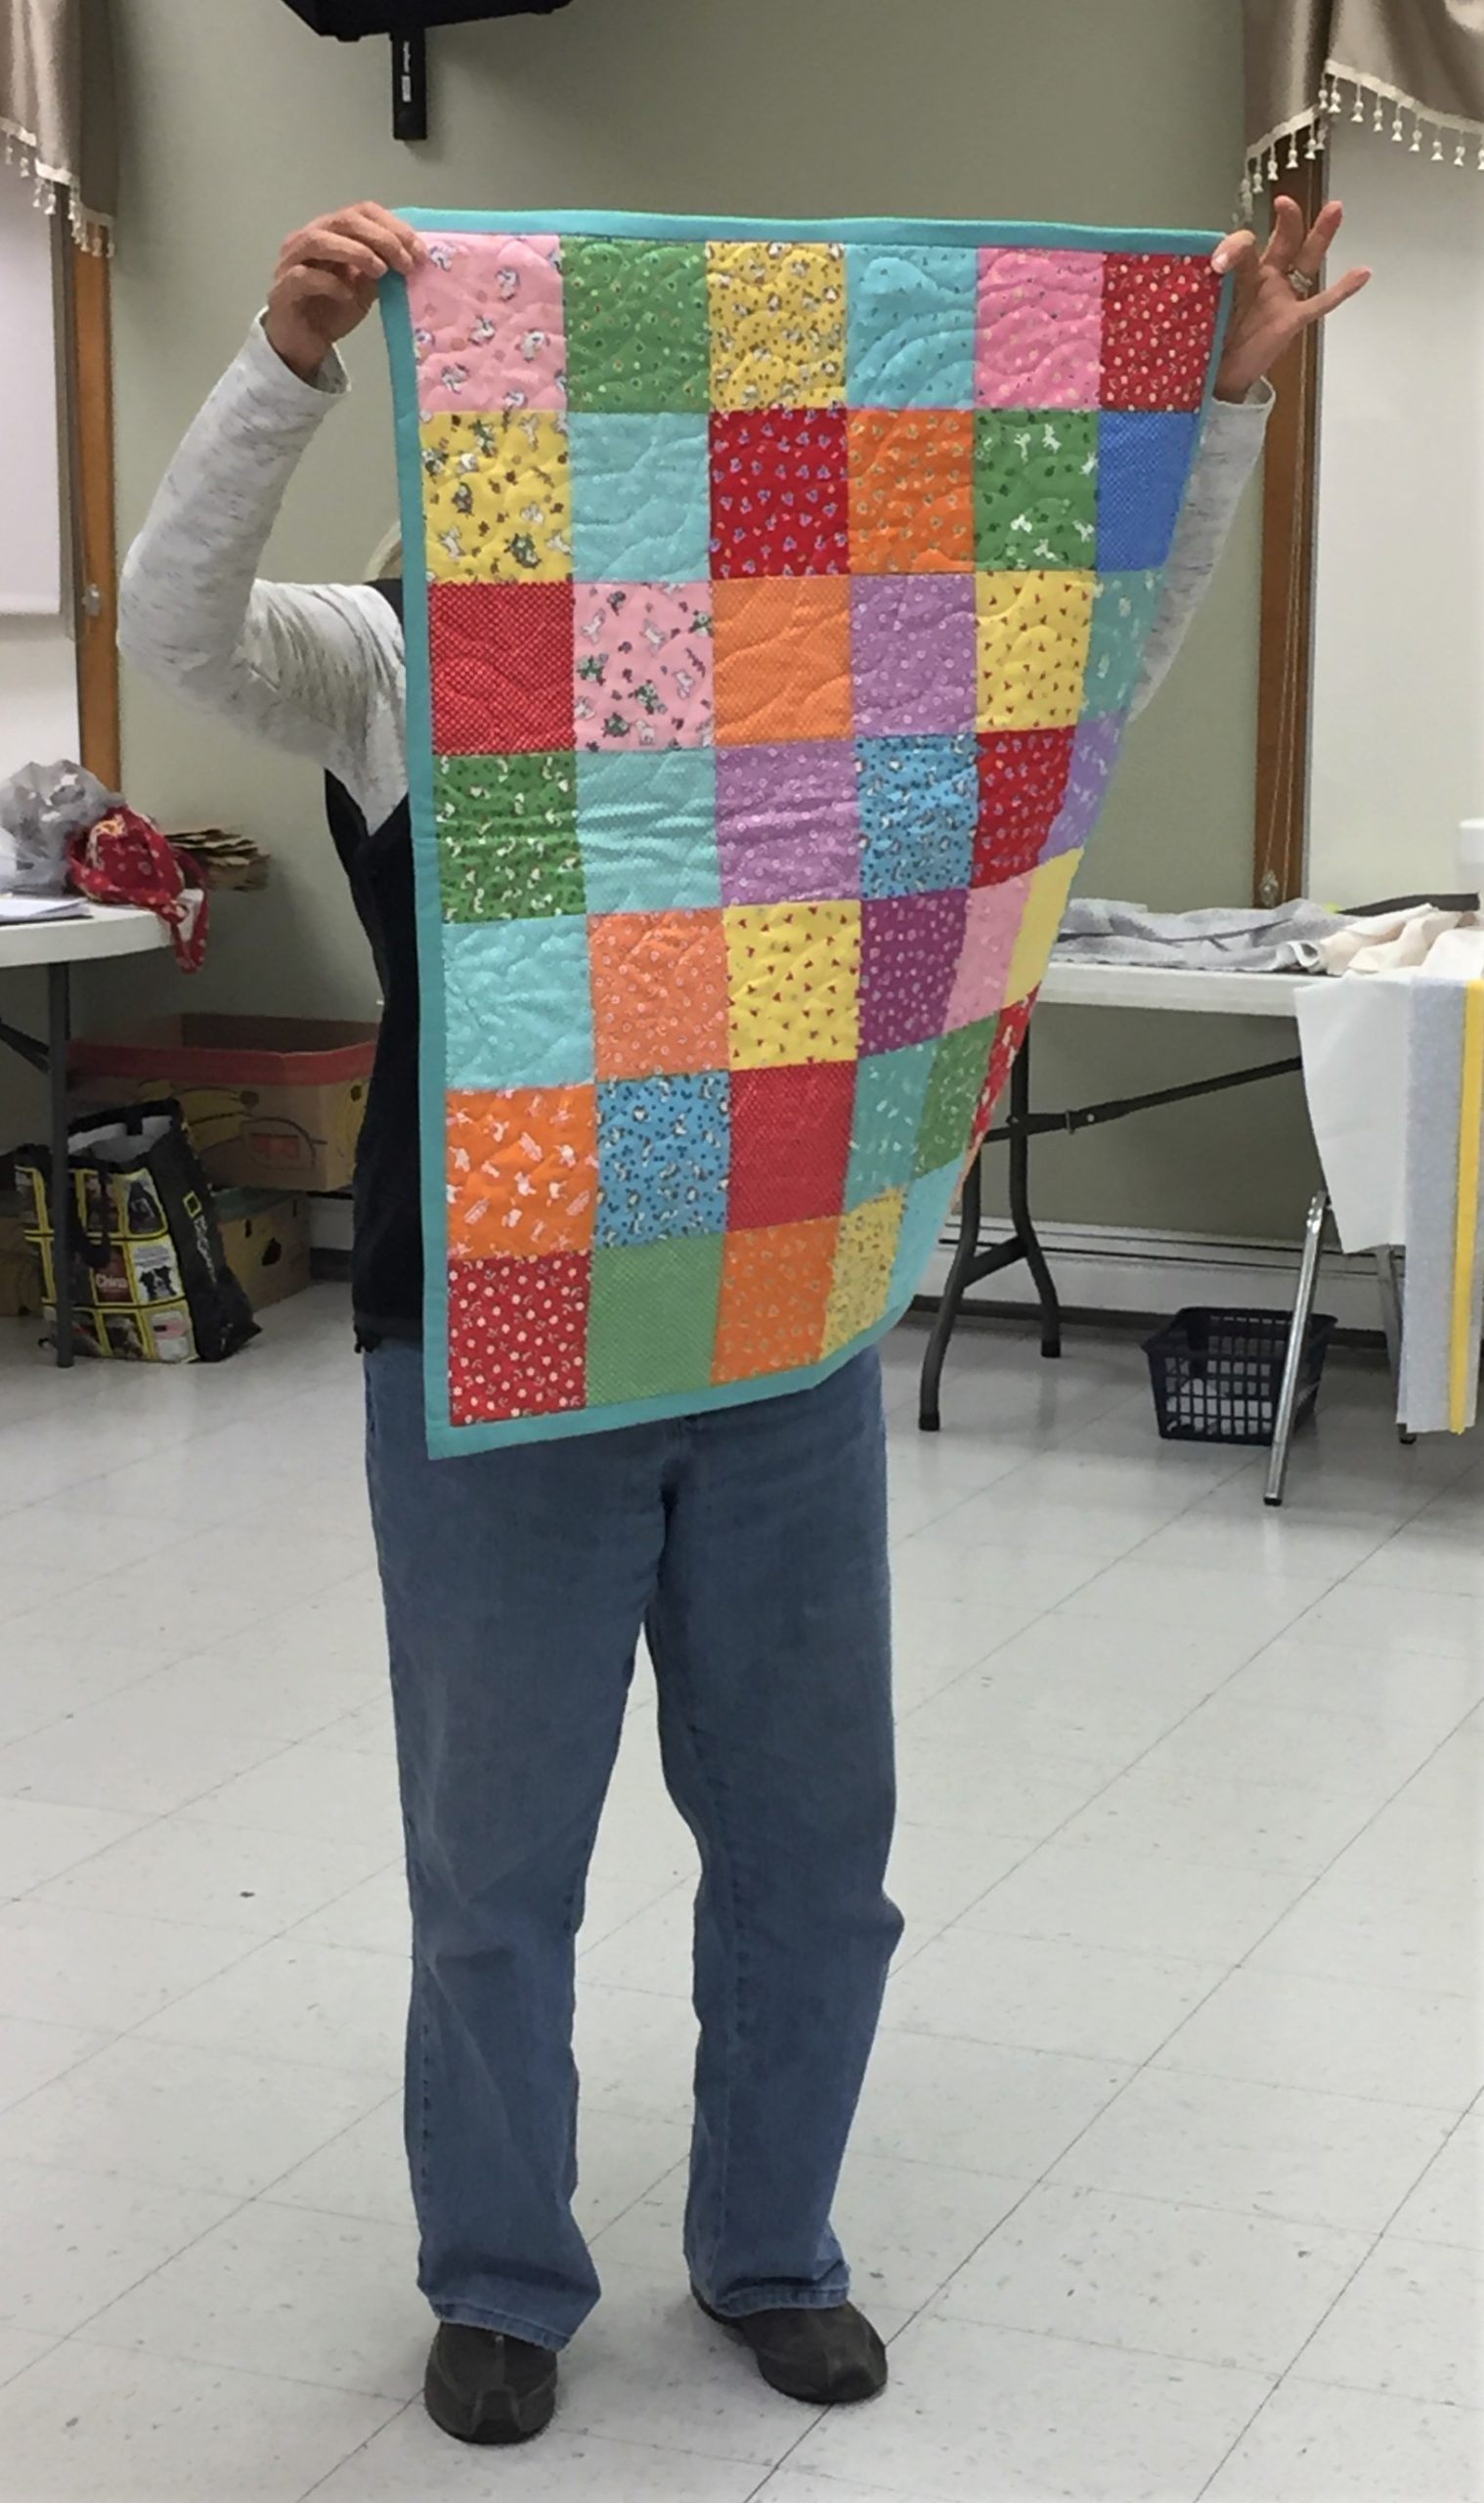 Debby's Charming Baby Quilt